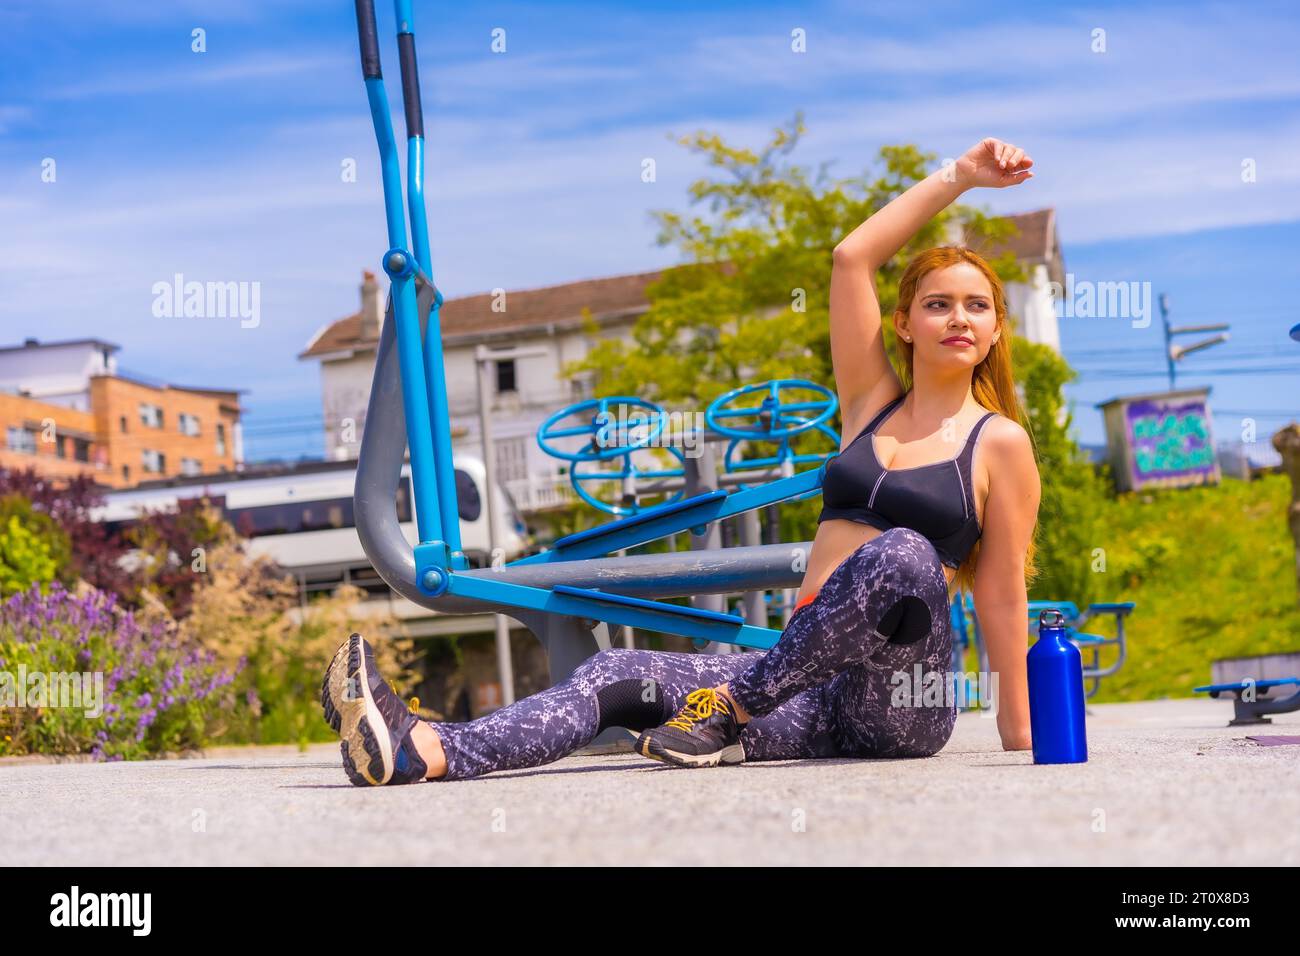 Red-haired woman with purple leggings and black overalls exercising on machines, stretching, sport in the city Stock Photo